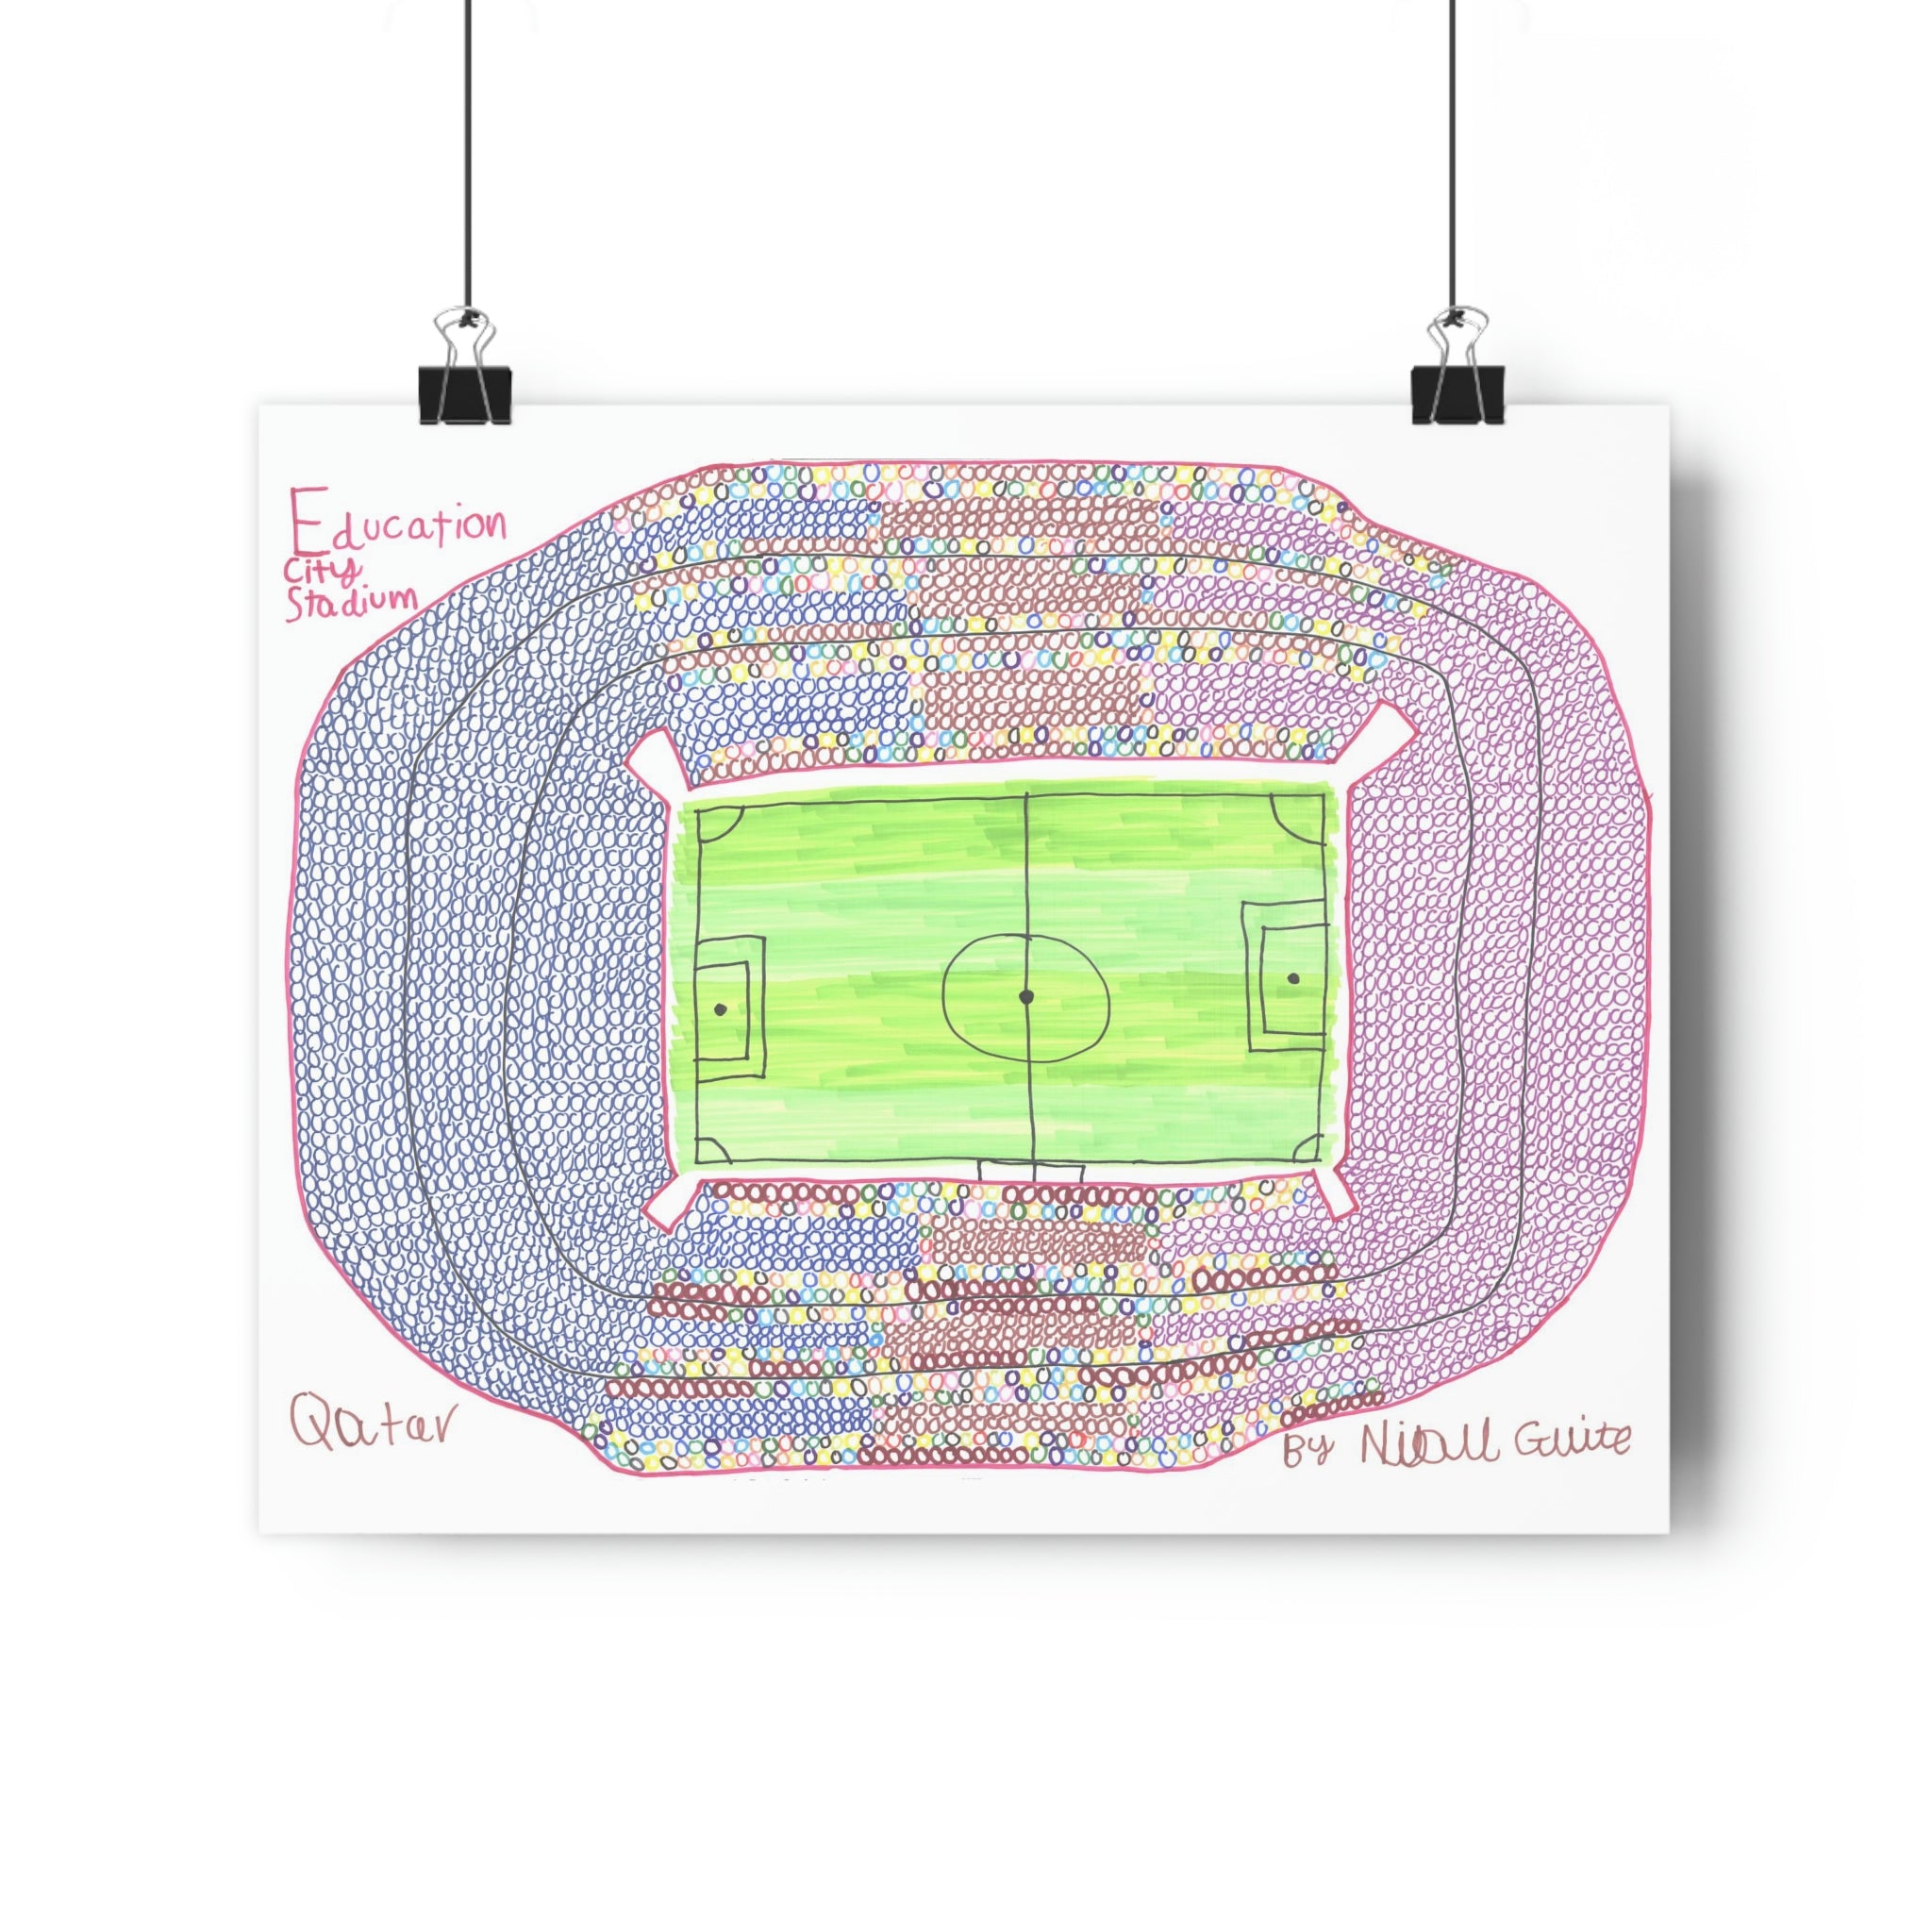 Education City Stadium - 2022 World Cup Special - Print